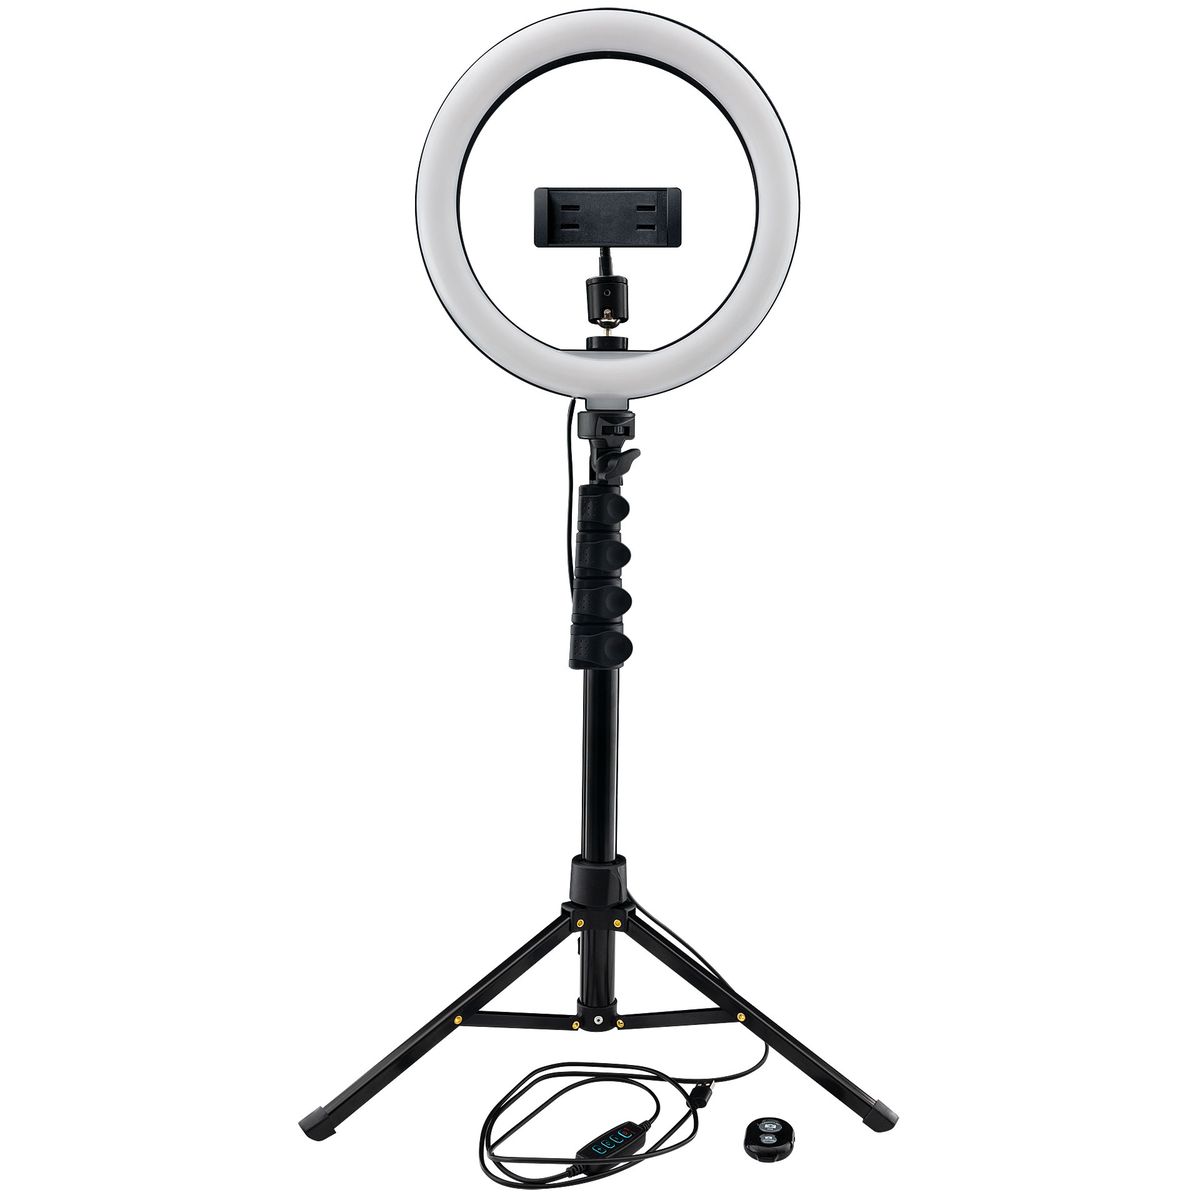 Deluxe Rechargeable Ring Light (with Built-in Battery), Multitasky